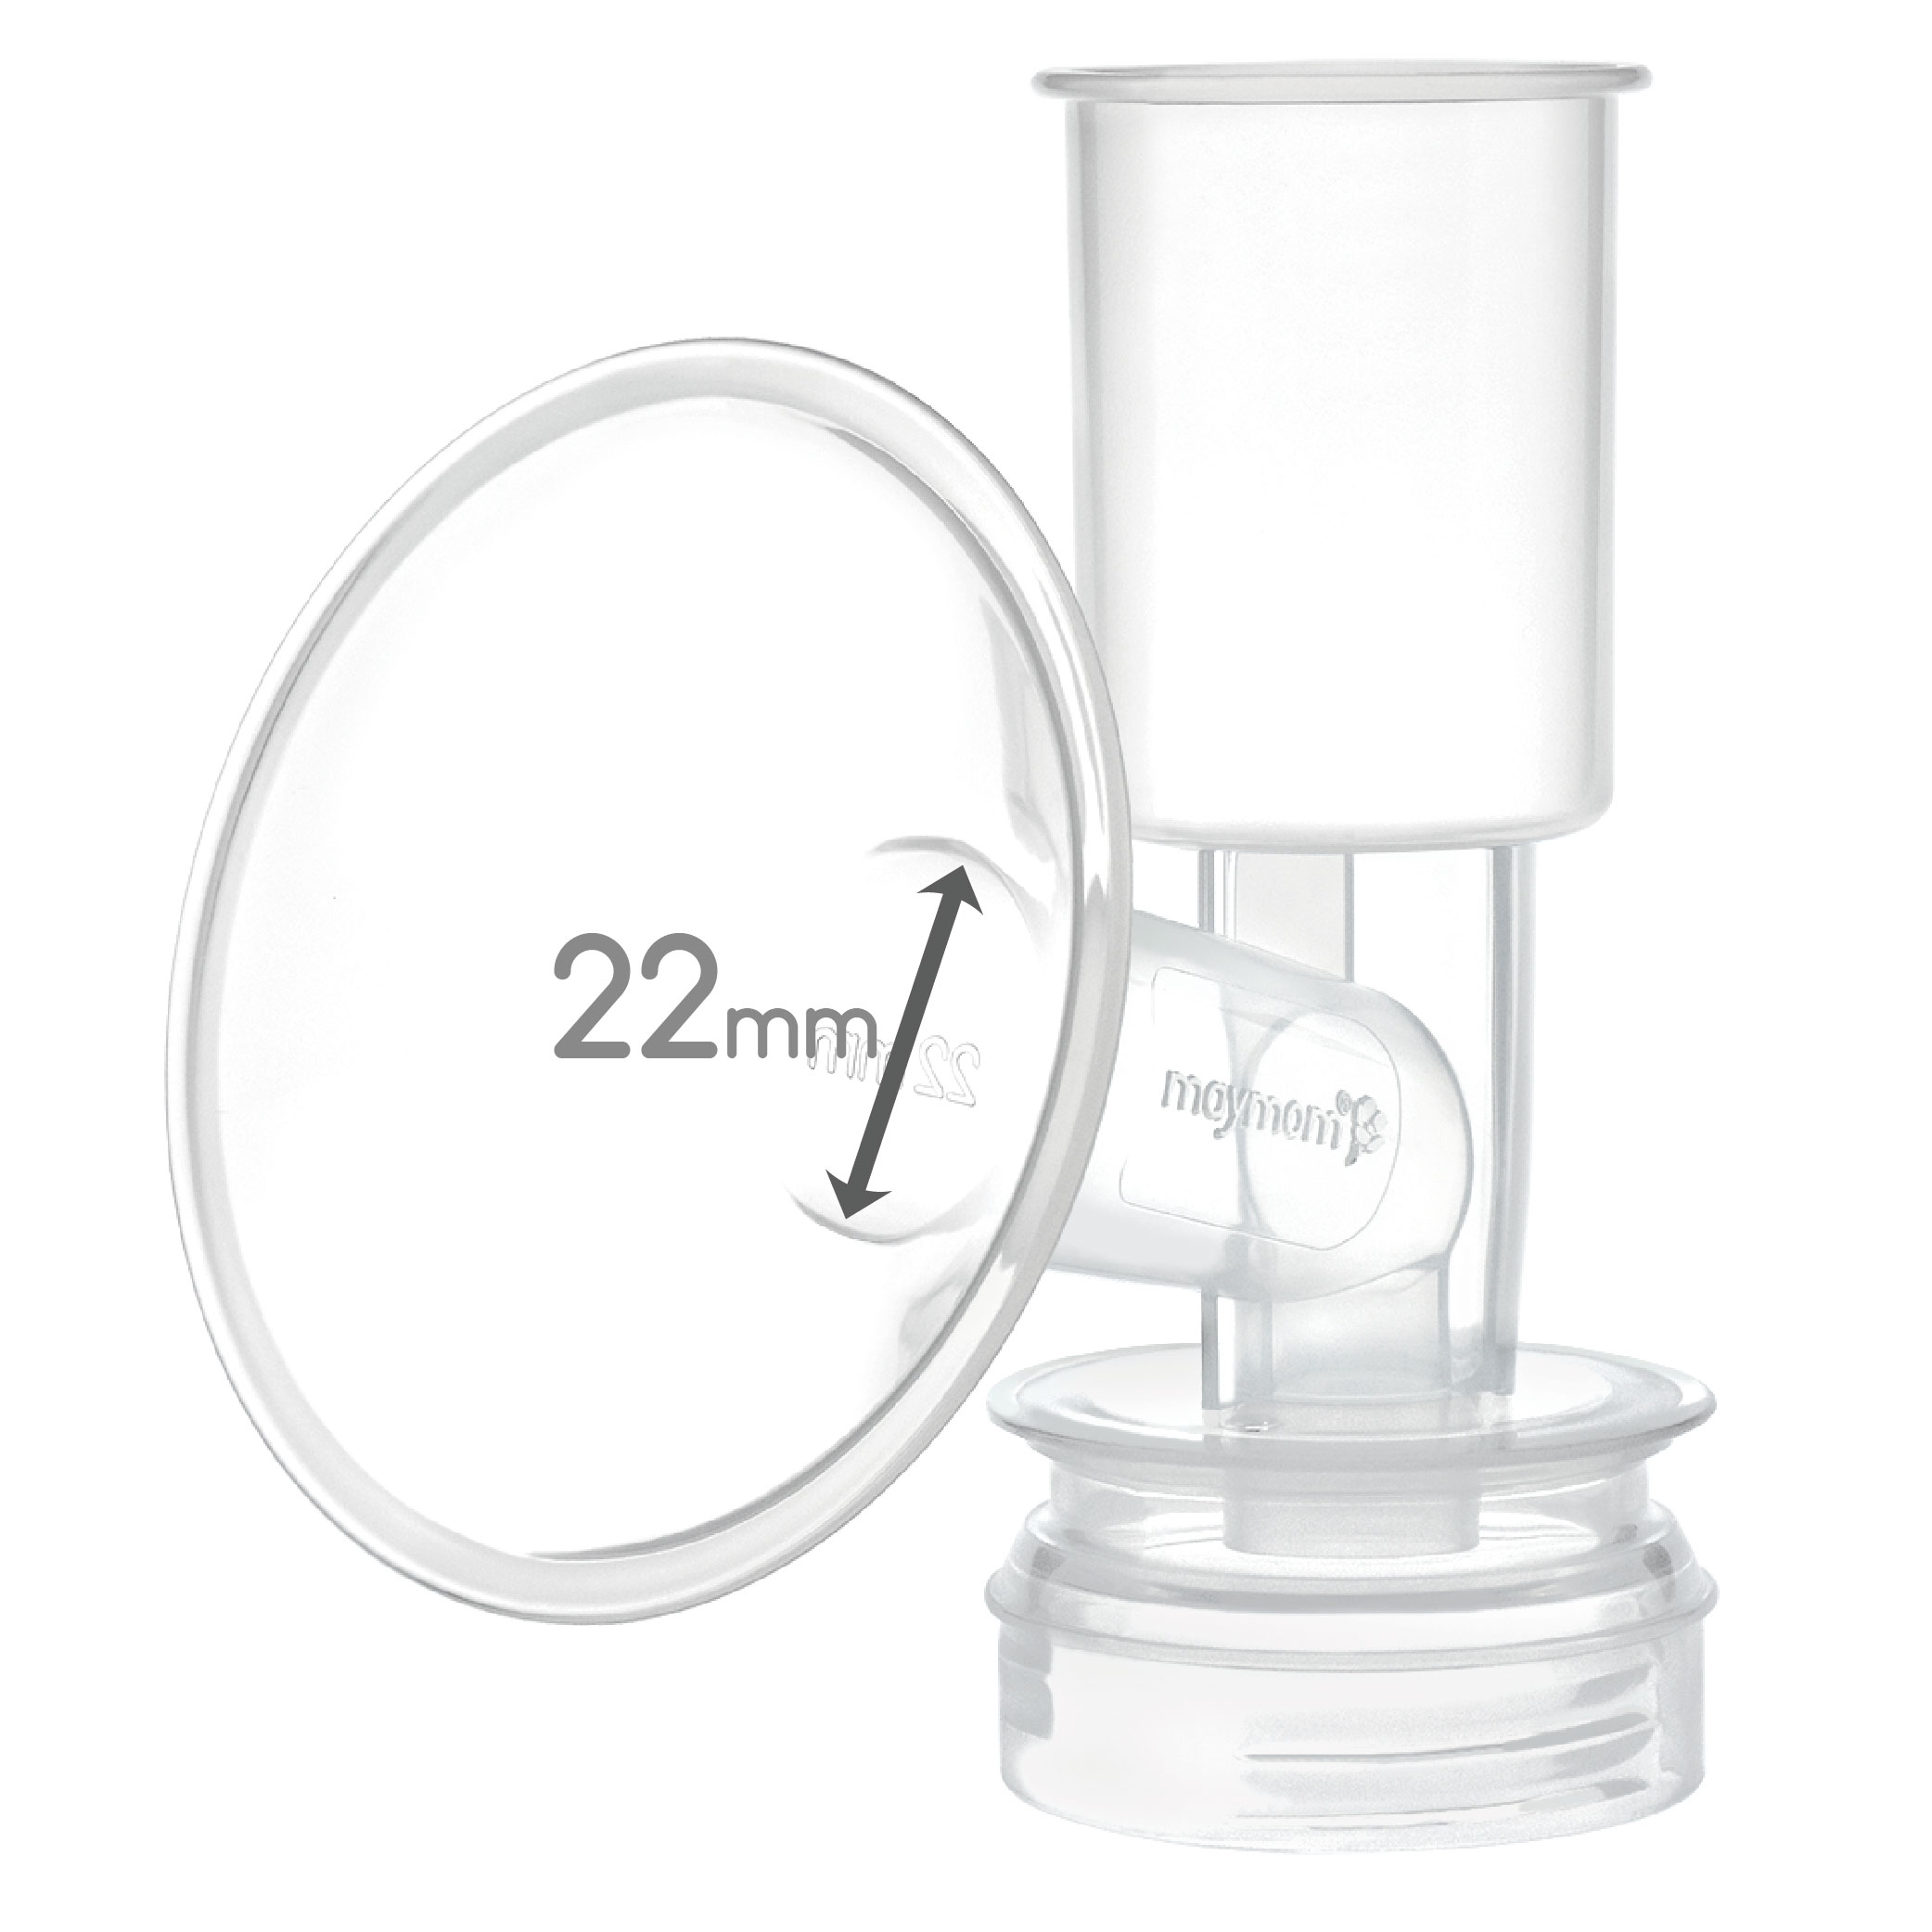 Maymom Breast Shield Flange Compatible with Ameda Breast Pumps (22 mm, 1-Piece)